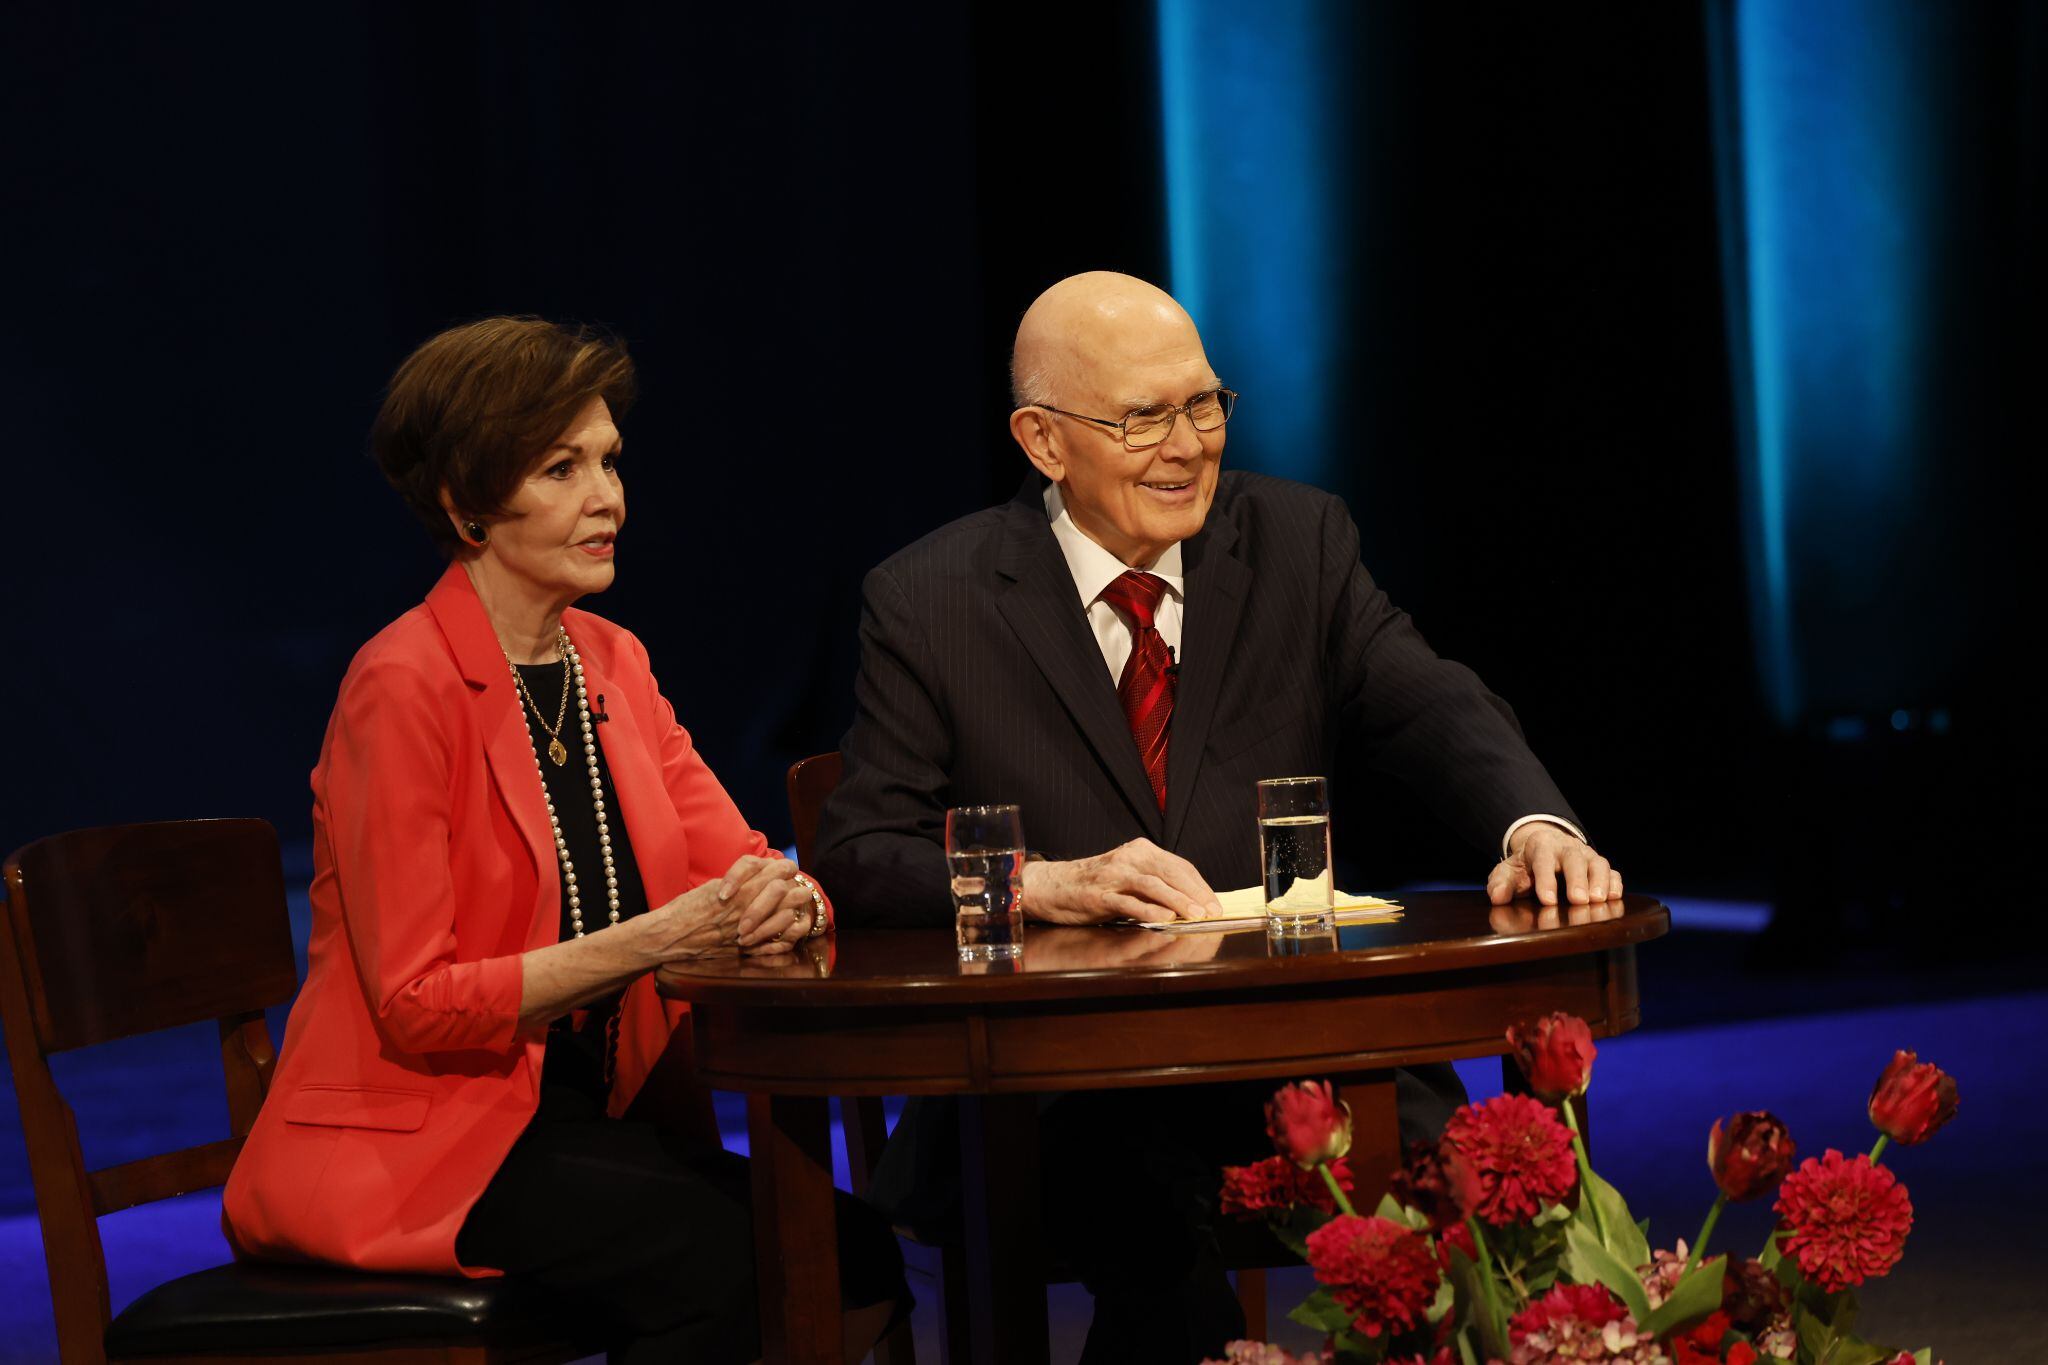 (The Church of Jesus Christ of Latter-day Saints)
President Dallin H. Oaks of the First Presidency of The Church of Jesus Christ of Latter-day Saints and wife Kristen speak to young adults at a worldwide devotional broadcast in May 2023. The couple urged young adults to stop delaying marriage and parenthood.